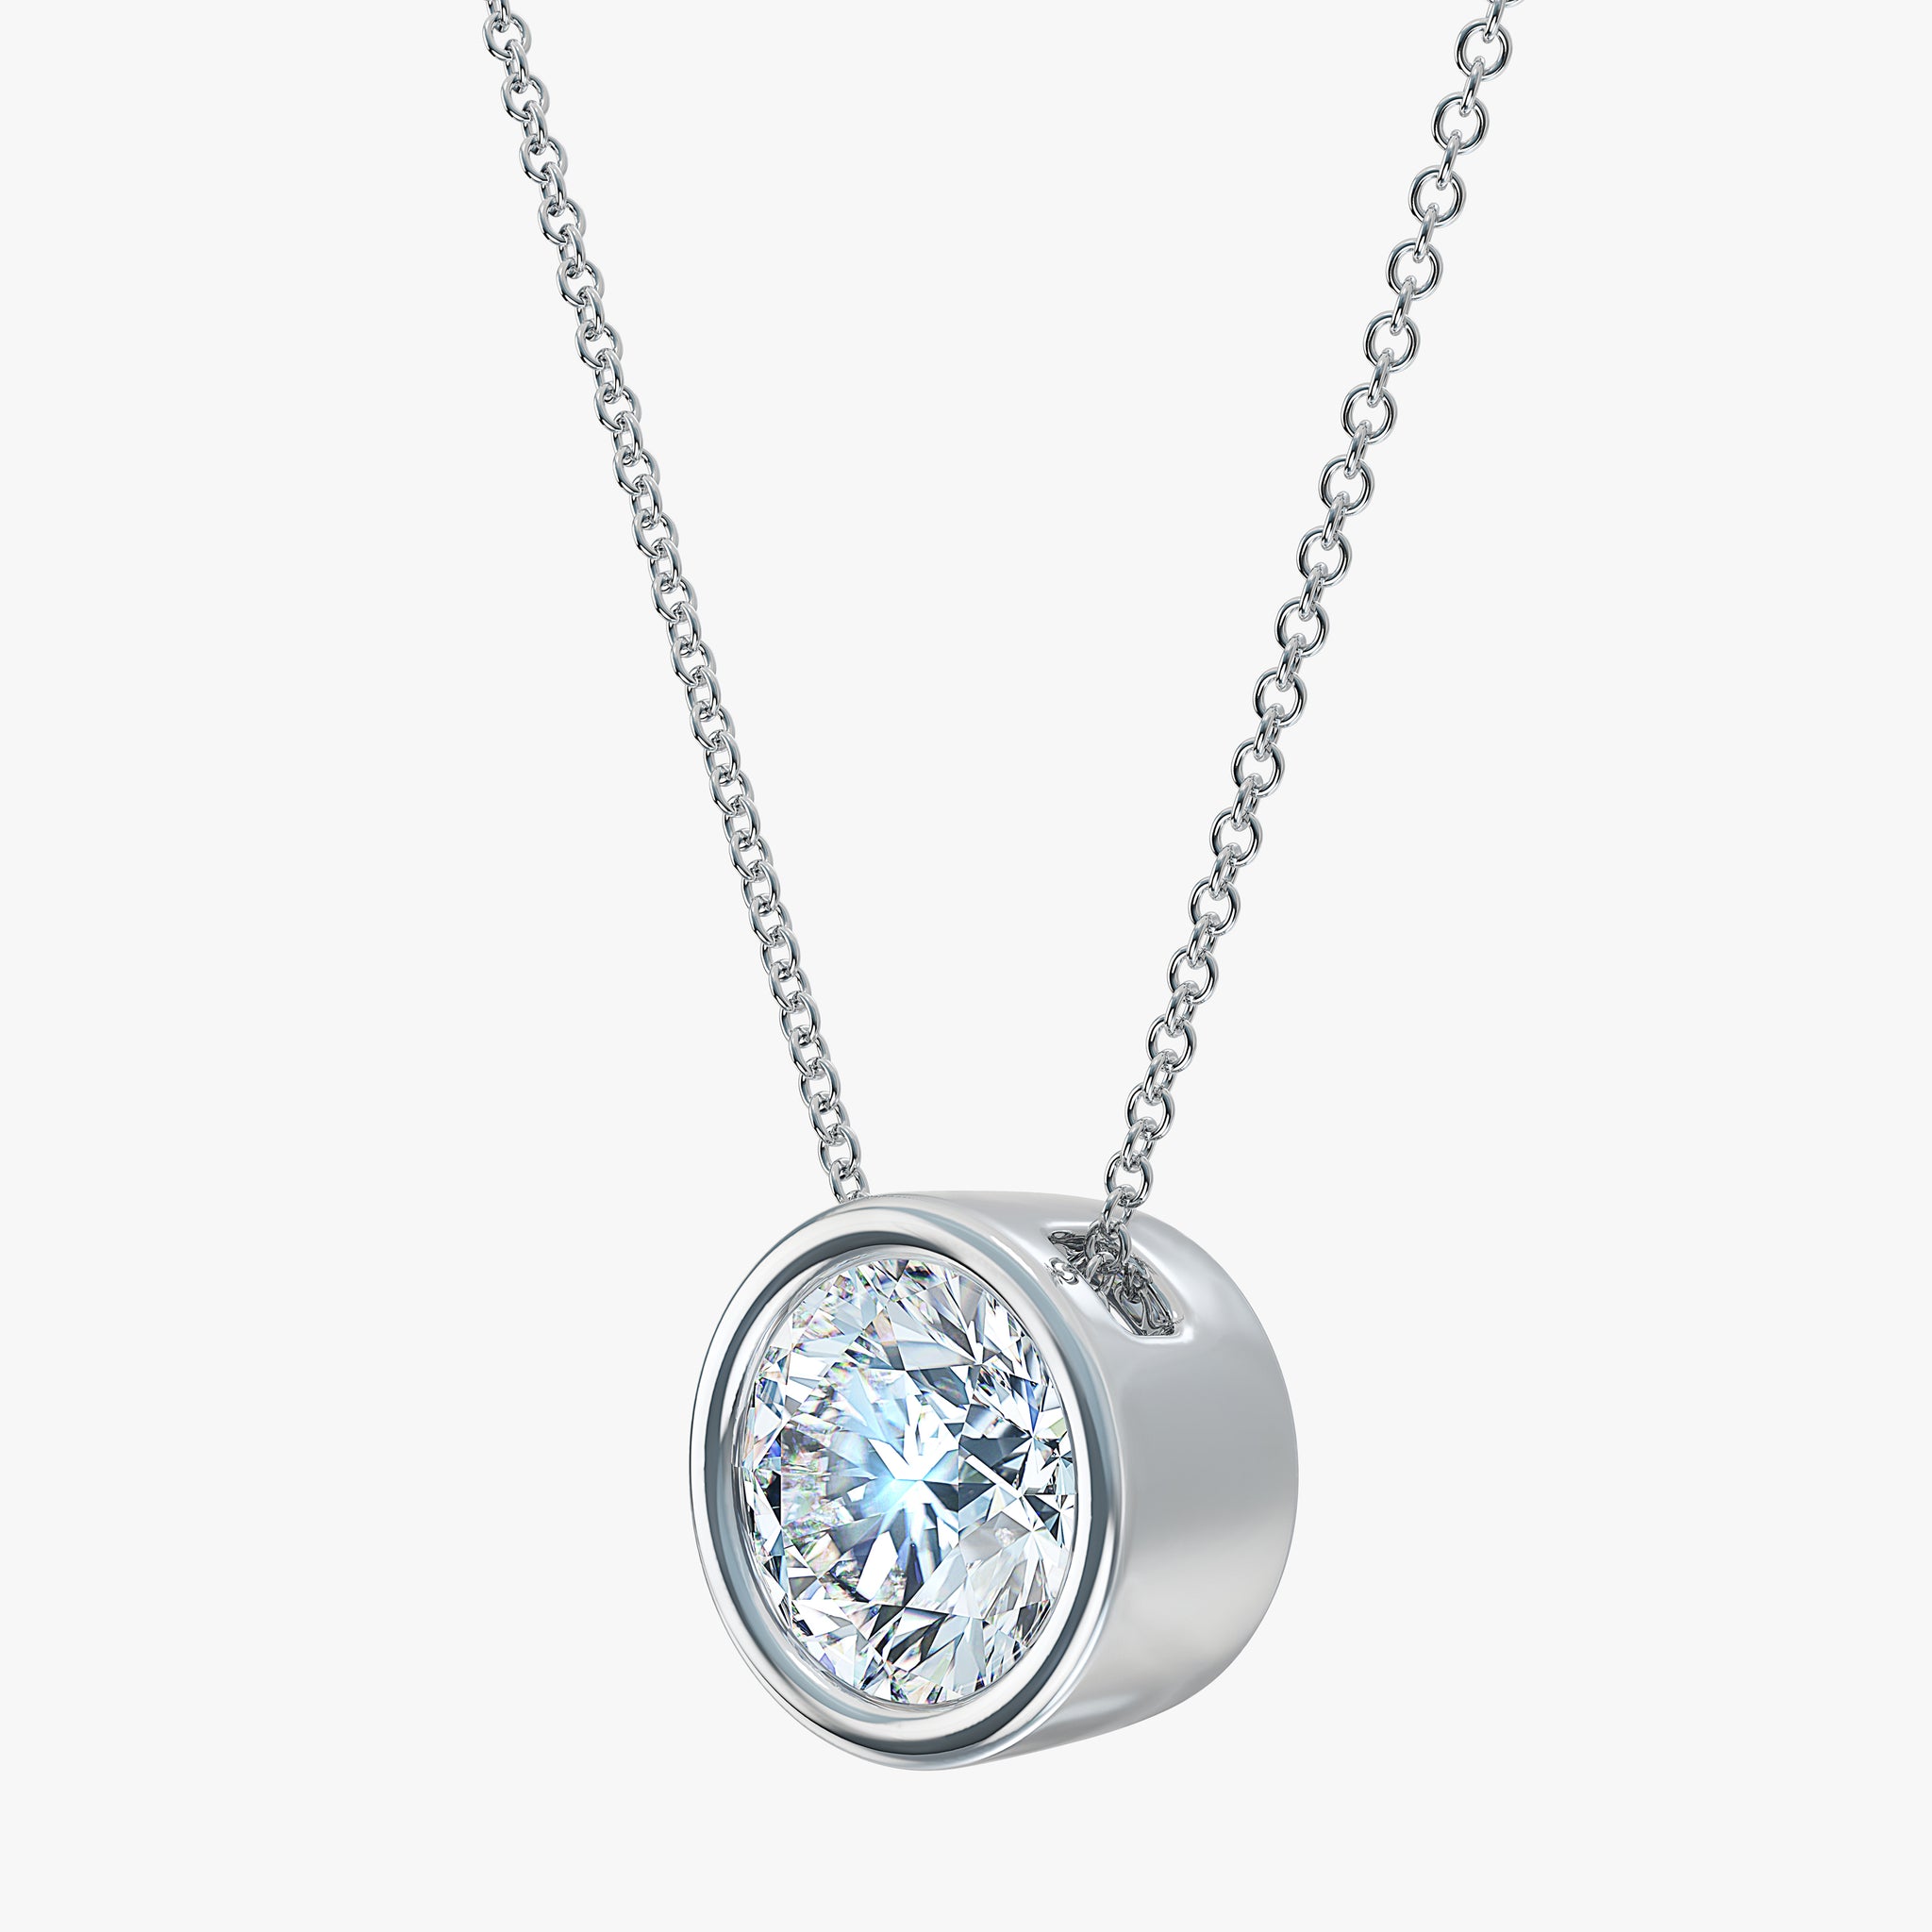 J'EVAR 14KT White Gold Solitaire Diamond Necklace ALTR Lab Grown Bezel Solitaire Diamond Necklace Side Perpective View